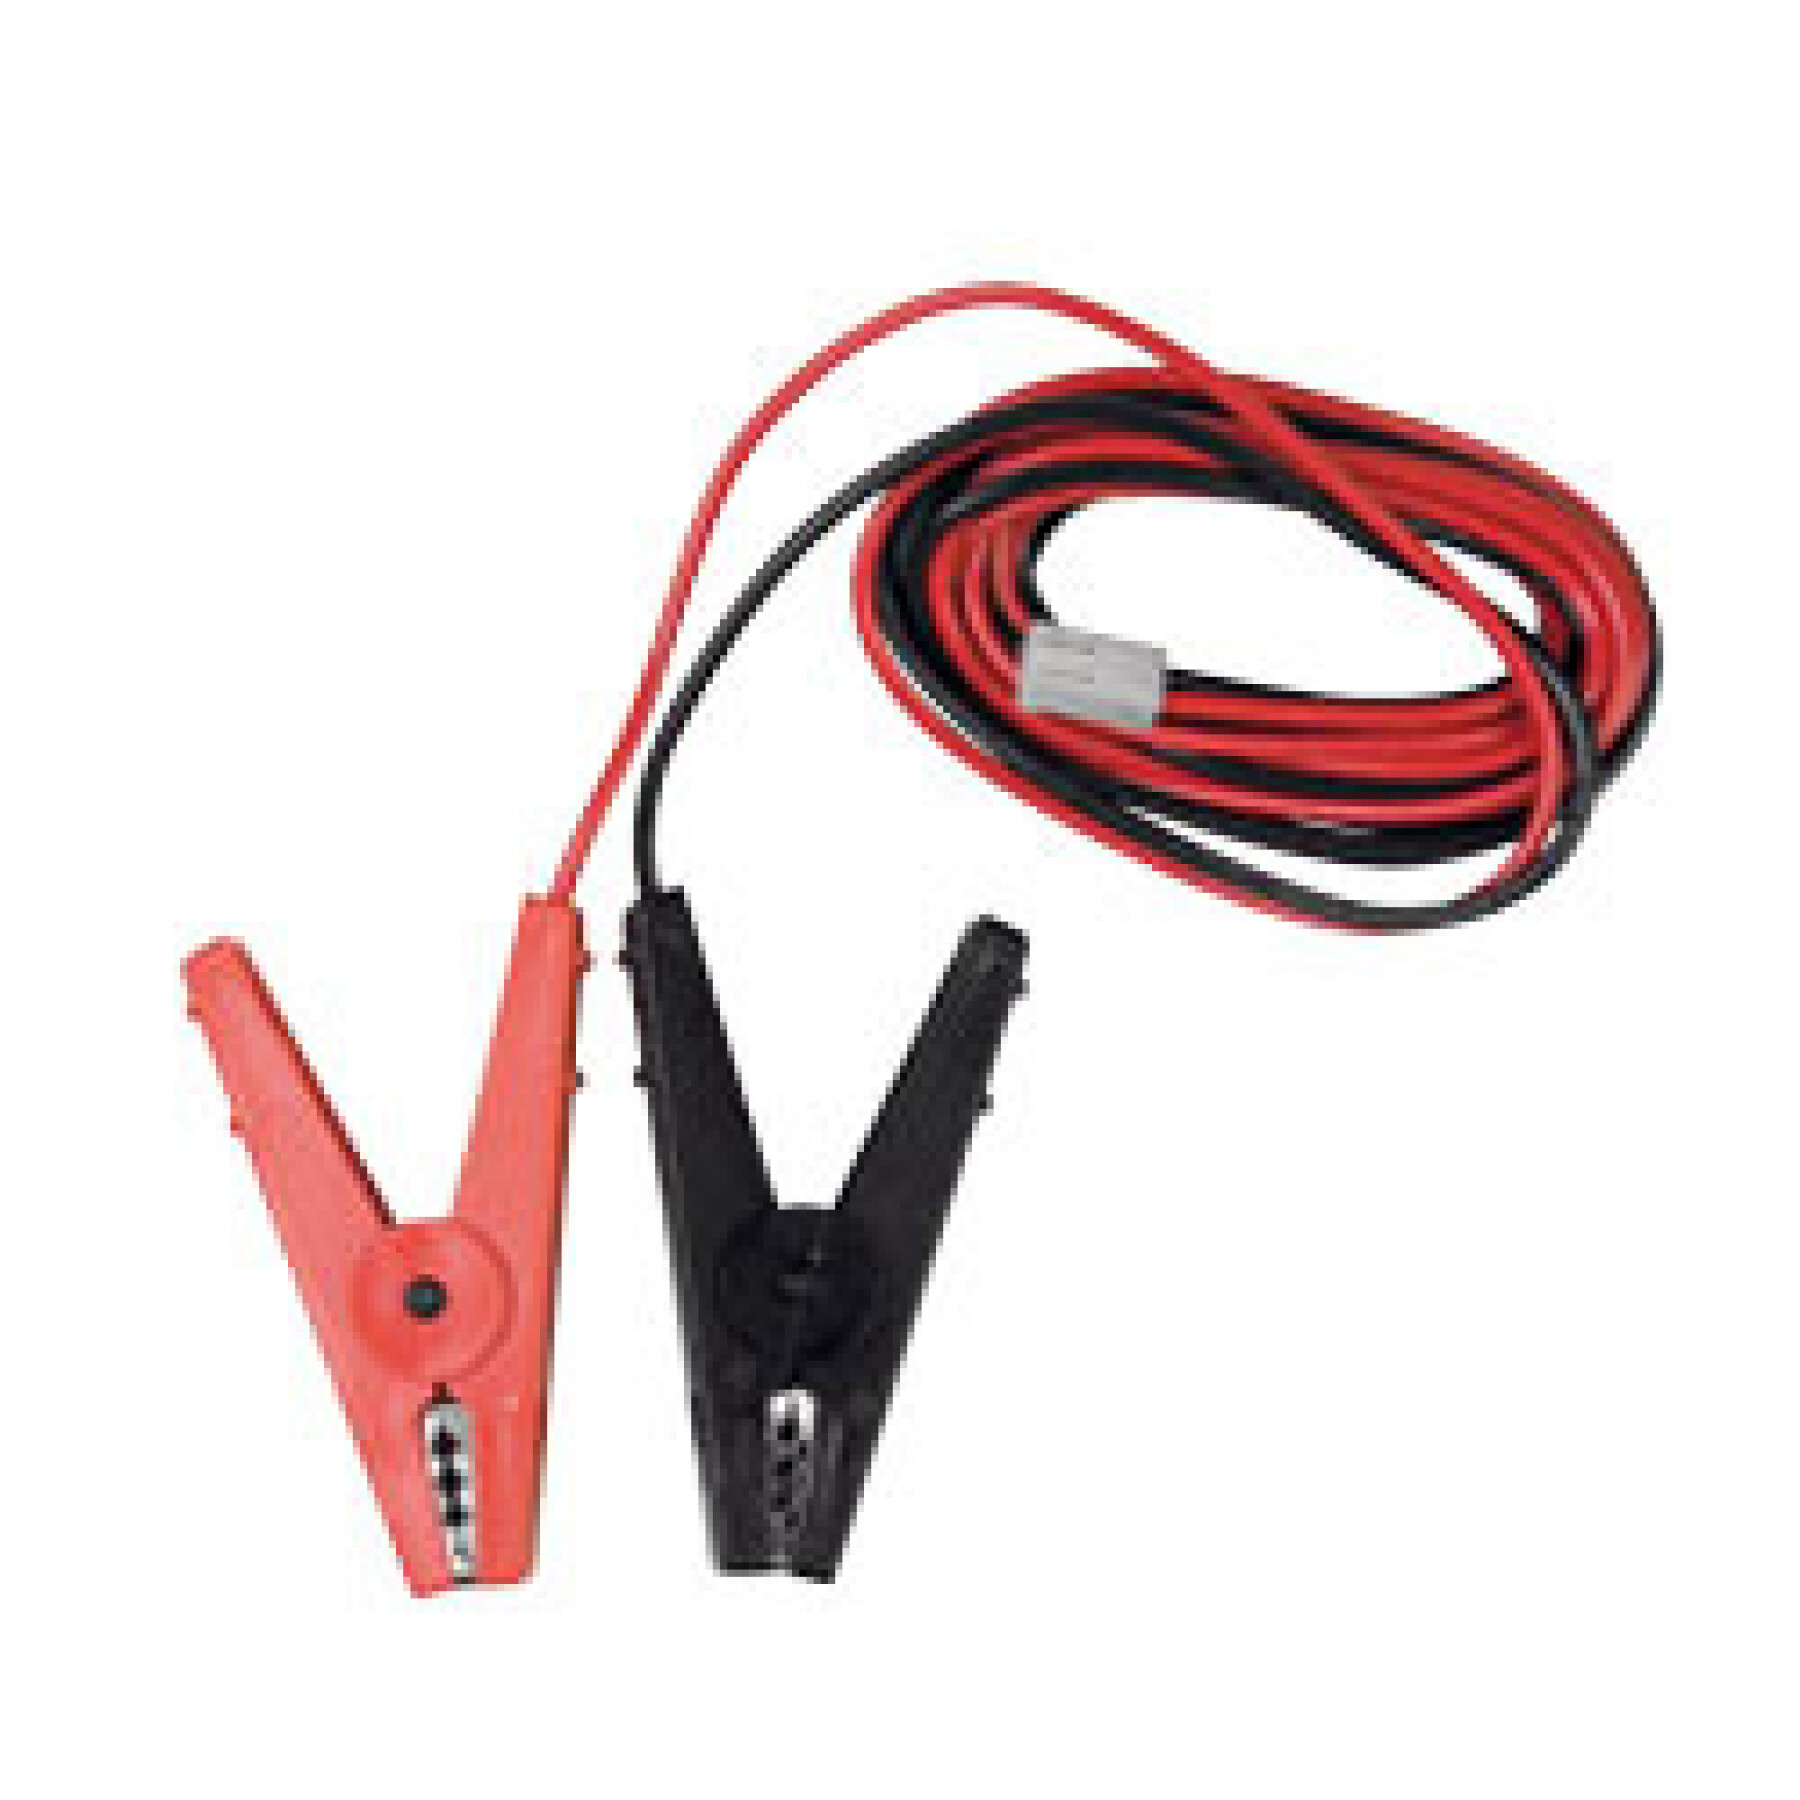 Connection cable for electric fence Gallagher